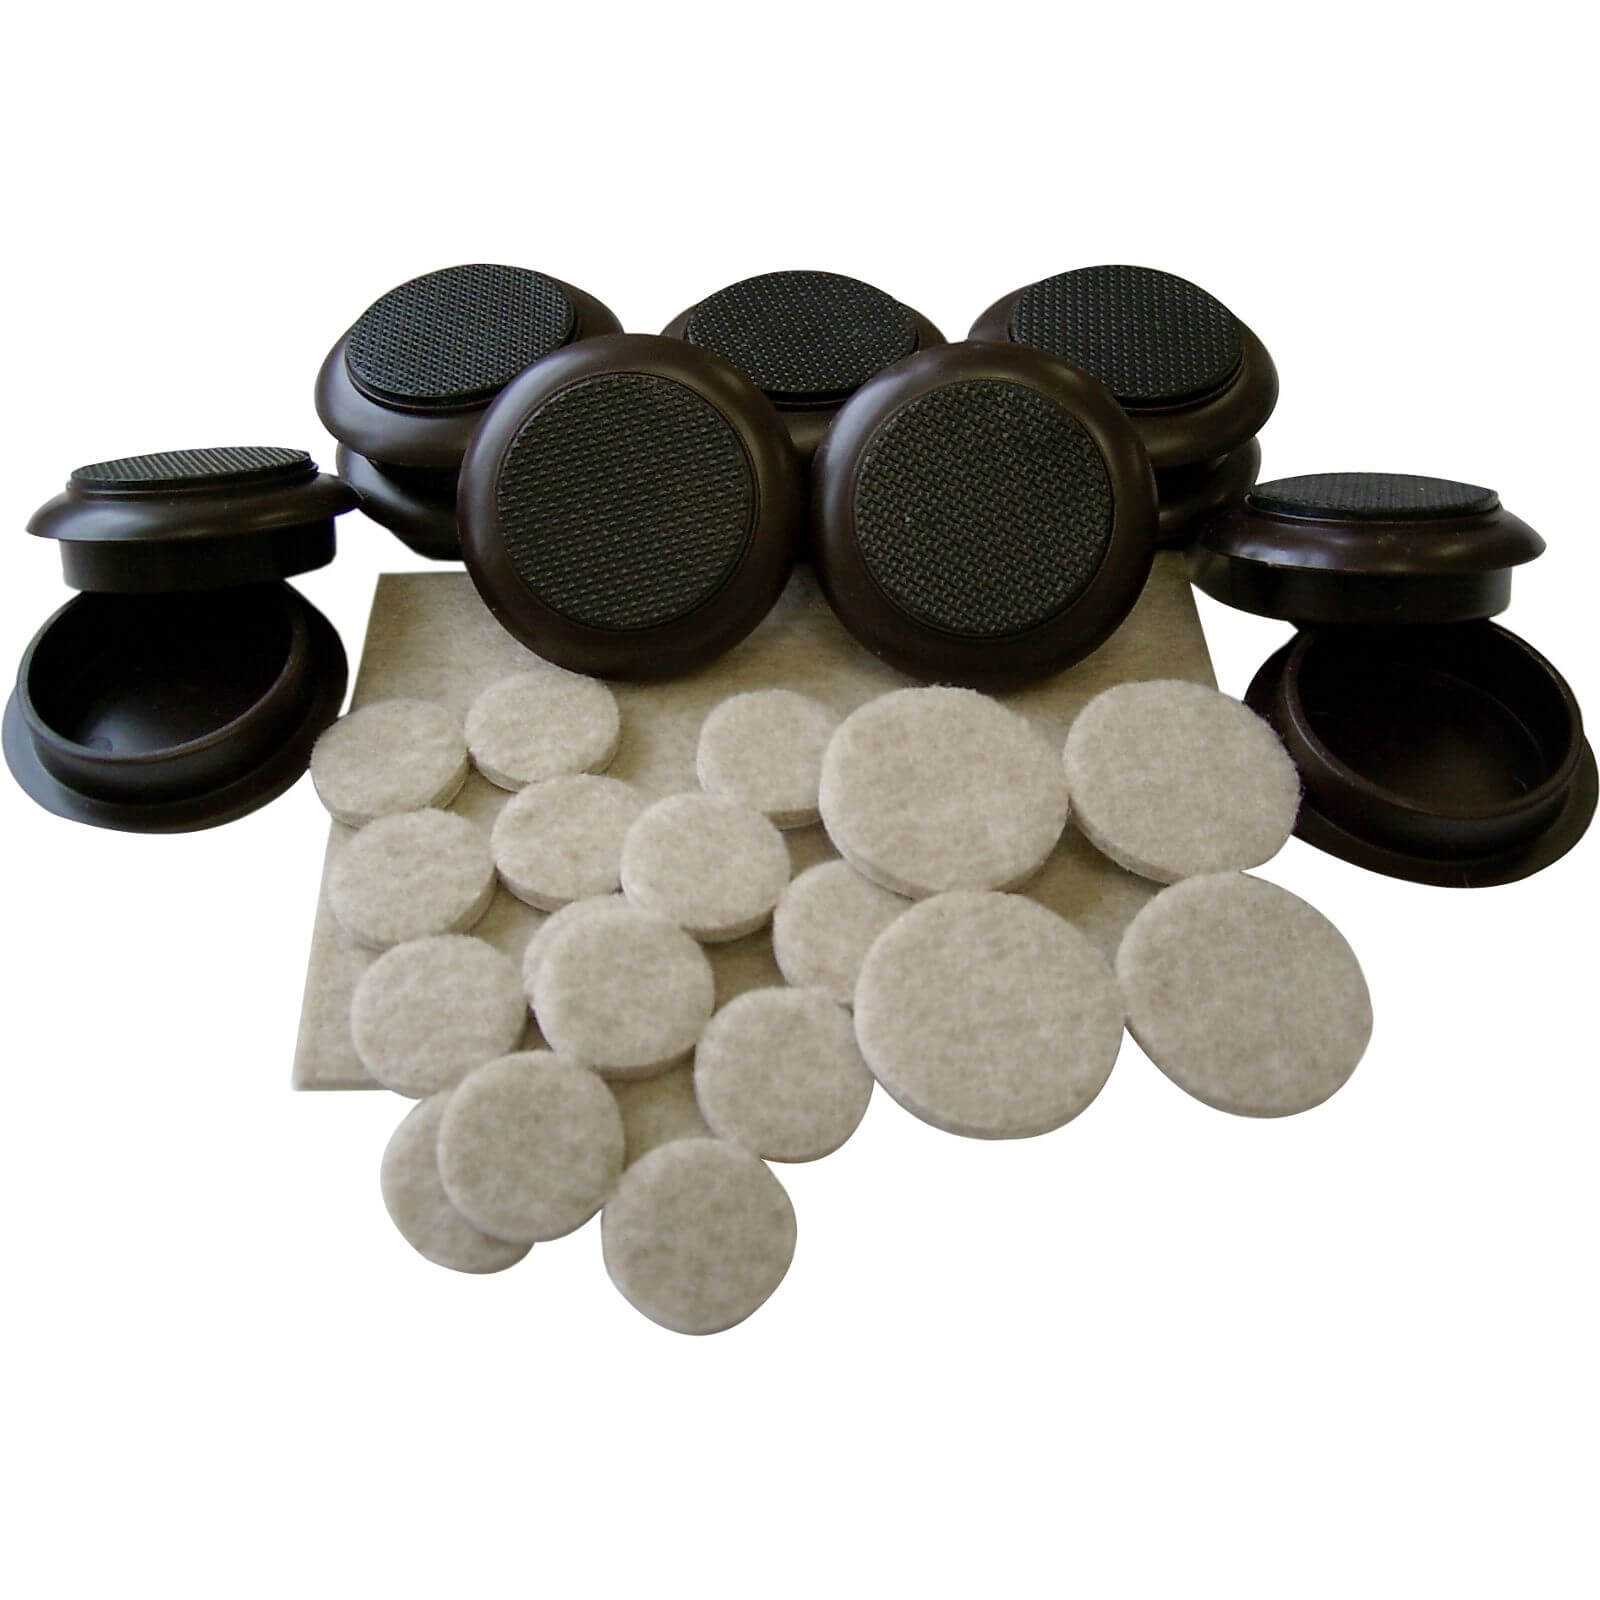 Photo of Felt Pads And Castor Cups - 59 Pack